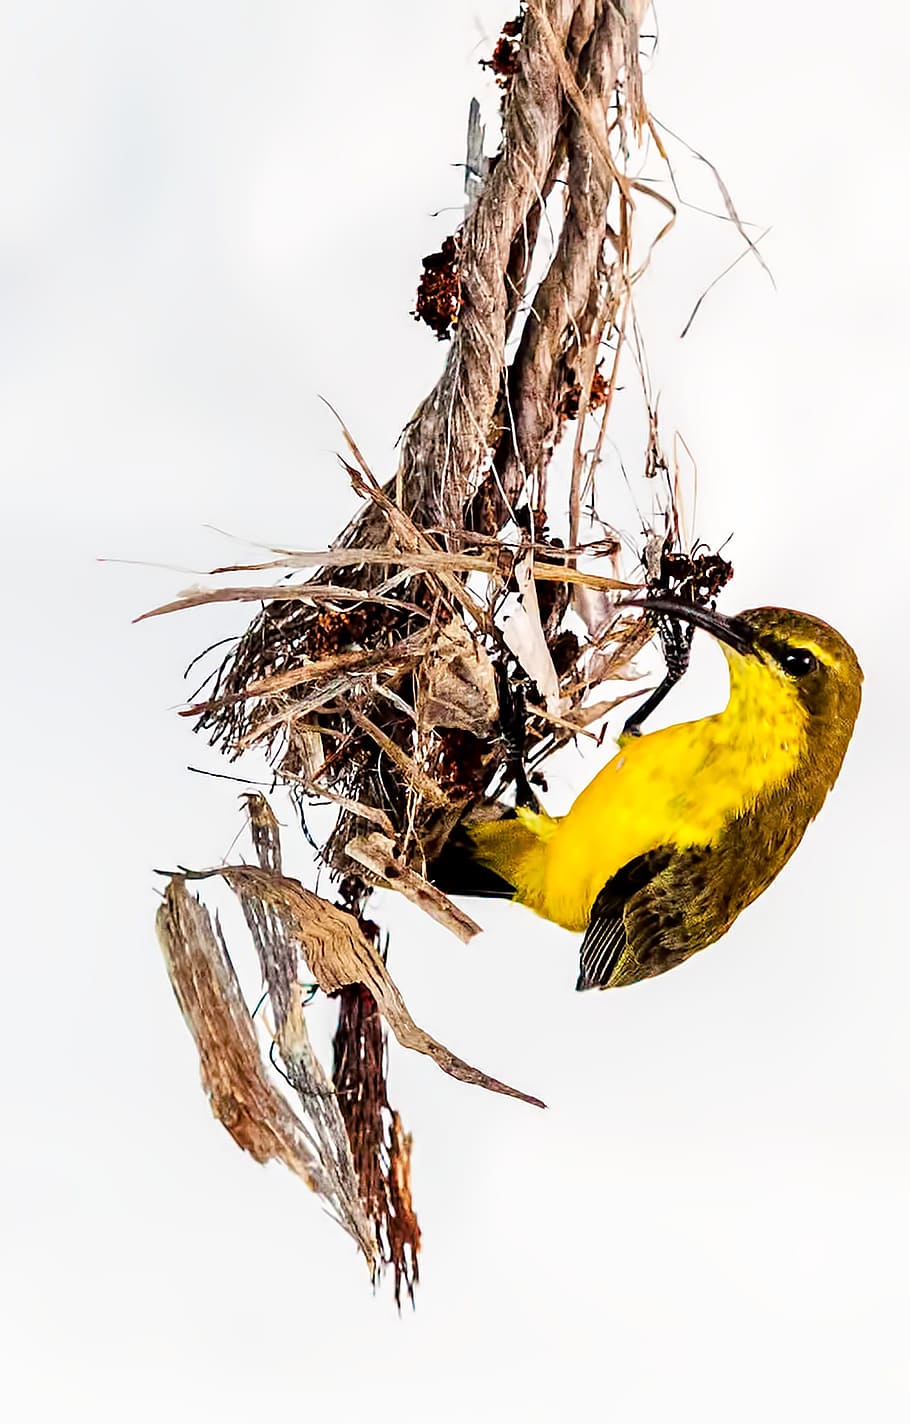 bird, olive backed sunbird, nest building, yellow bird, townsville, dry, plant, close-up, nature, white background